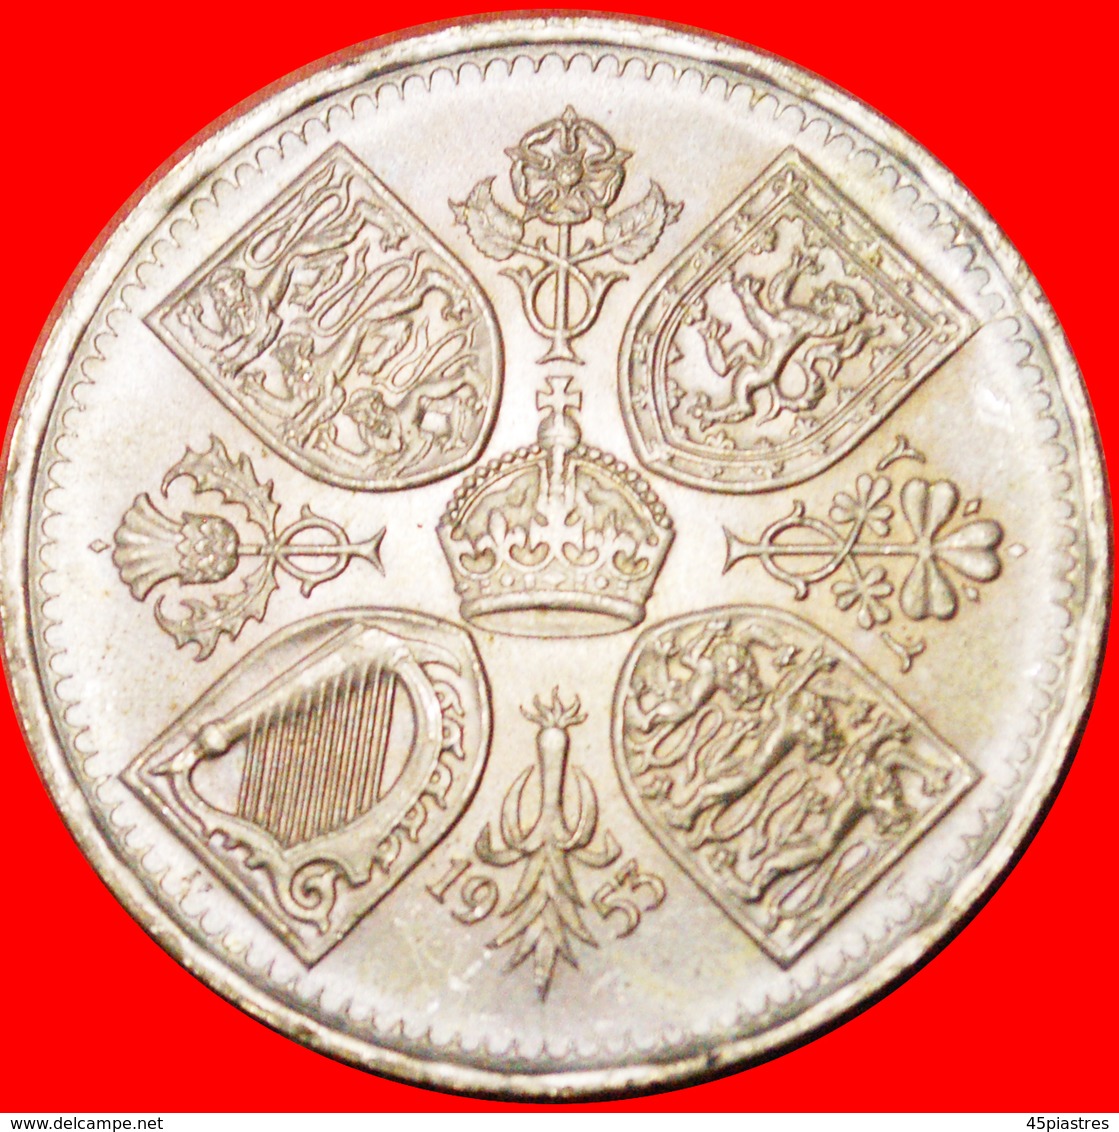 # CORONATION CROWN: GREAT BRITAIN ★ 5 SHILLINGS 1953 FIRST CROWN OF ELIZABETH II UNC MINT LUSTER★LOW START ★ NO RESERVE! - Maundy Sets  & Conmemorativas